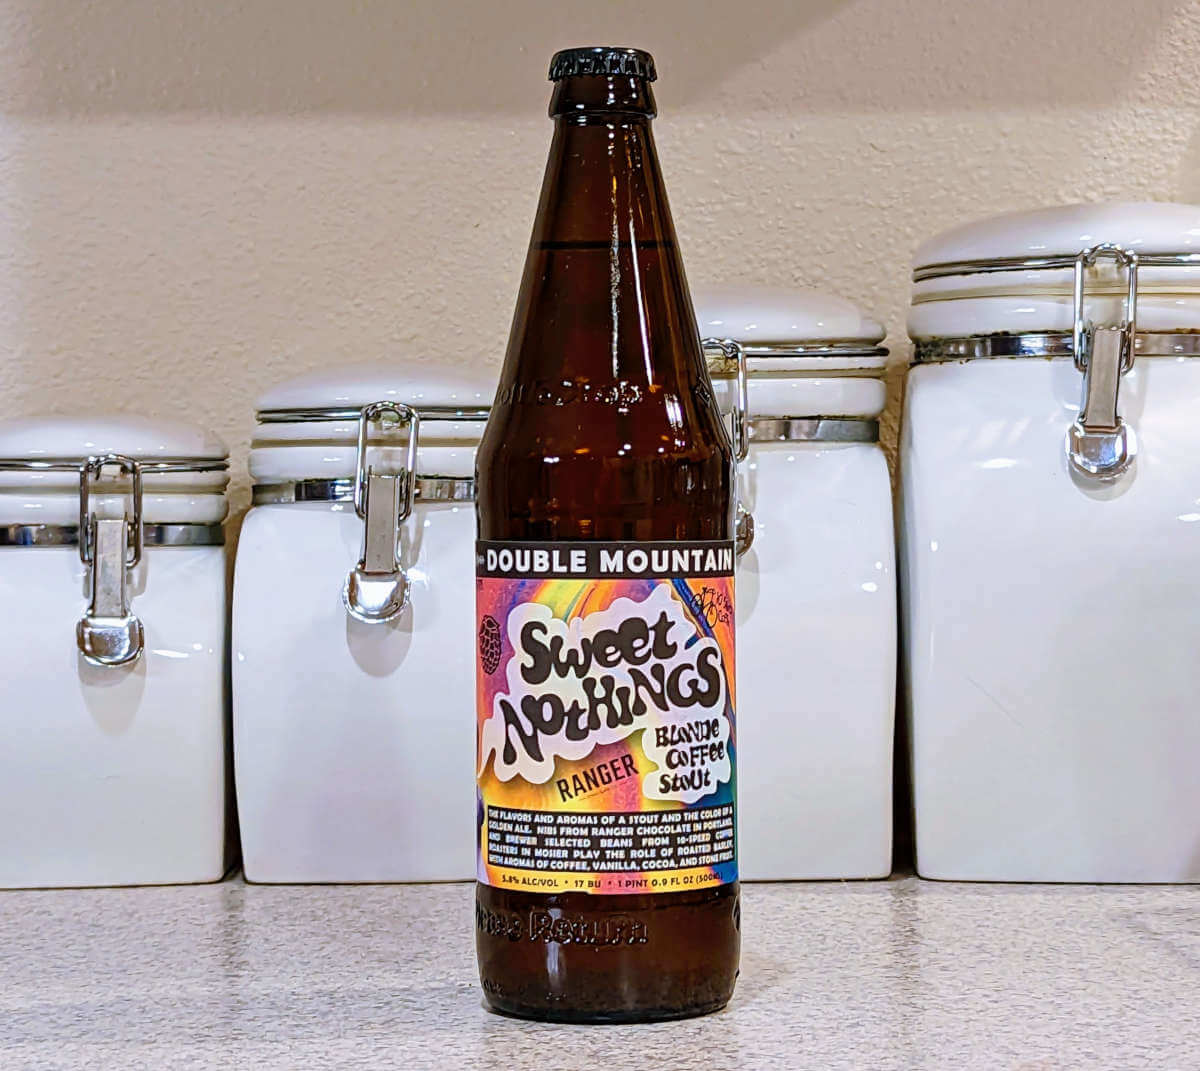 Received: Double Mountain Brewery Sweet Nothings Blonde Coffee Stout